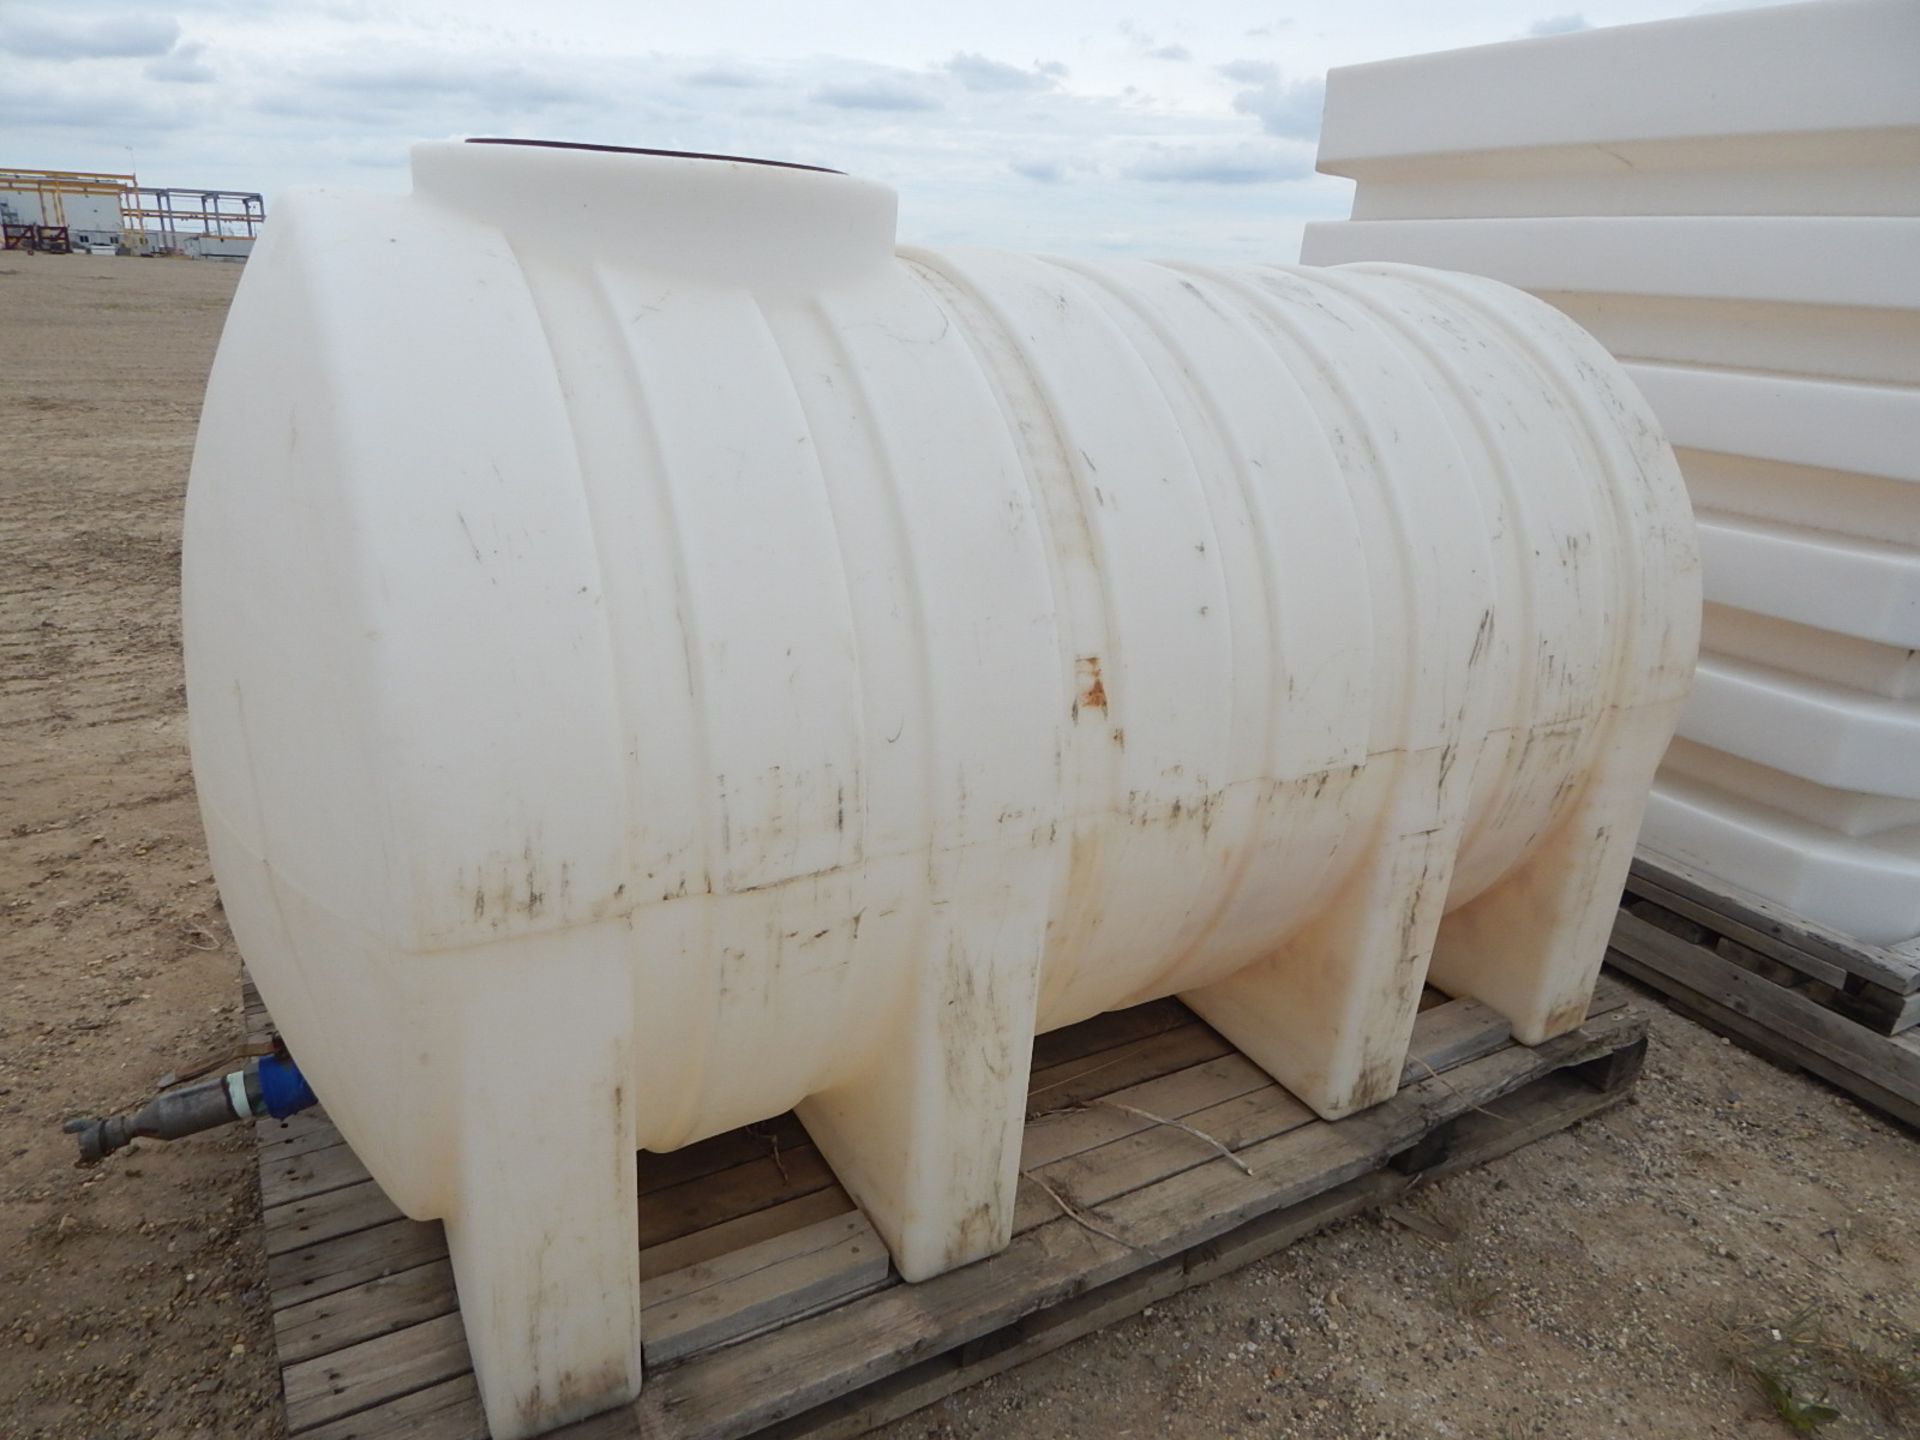 LIQUID STORAGE TANK WITH APPROX. 500GALLON CAPACITY, S/N: N/A - Image 2 of 2